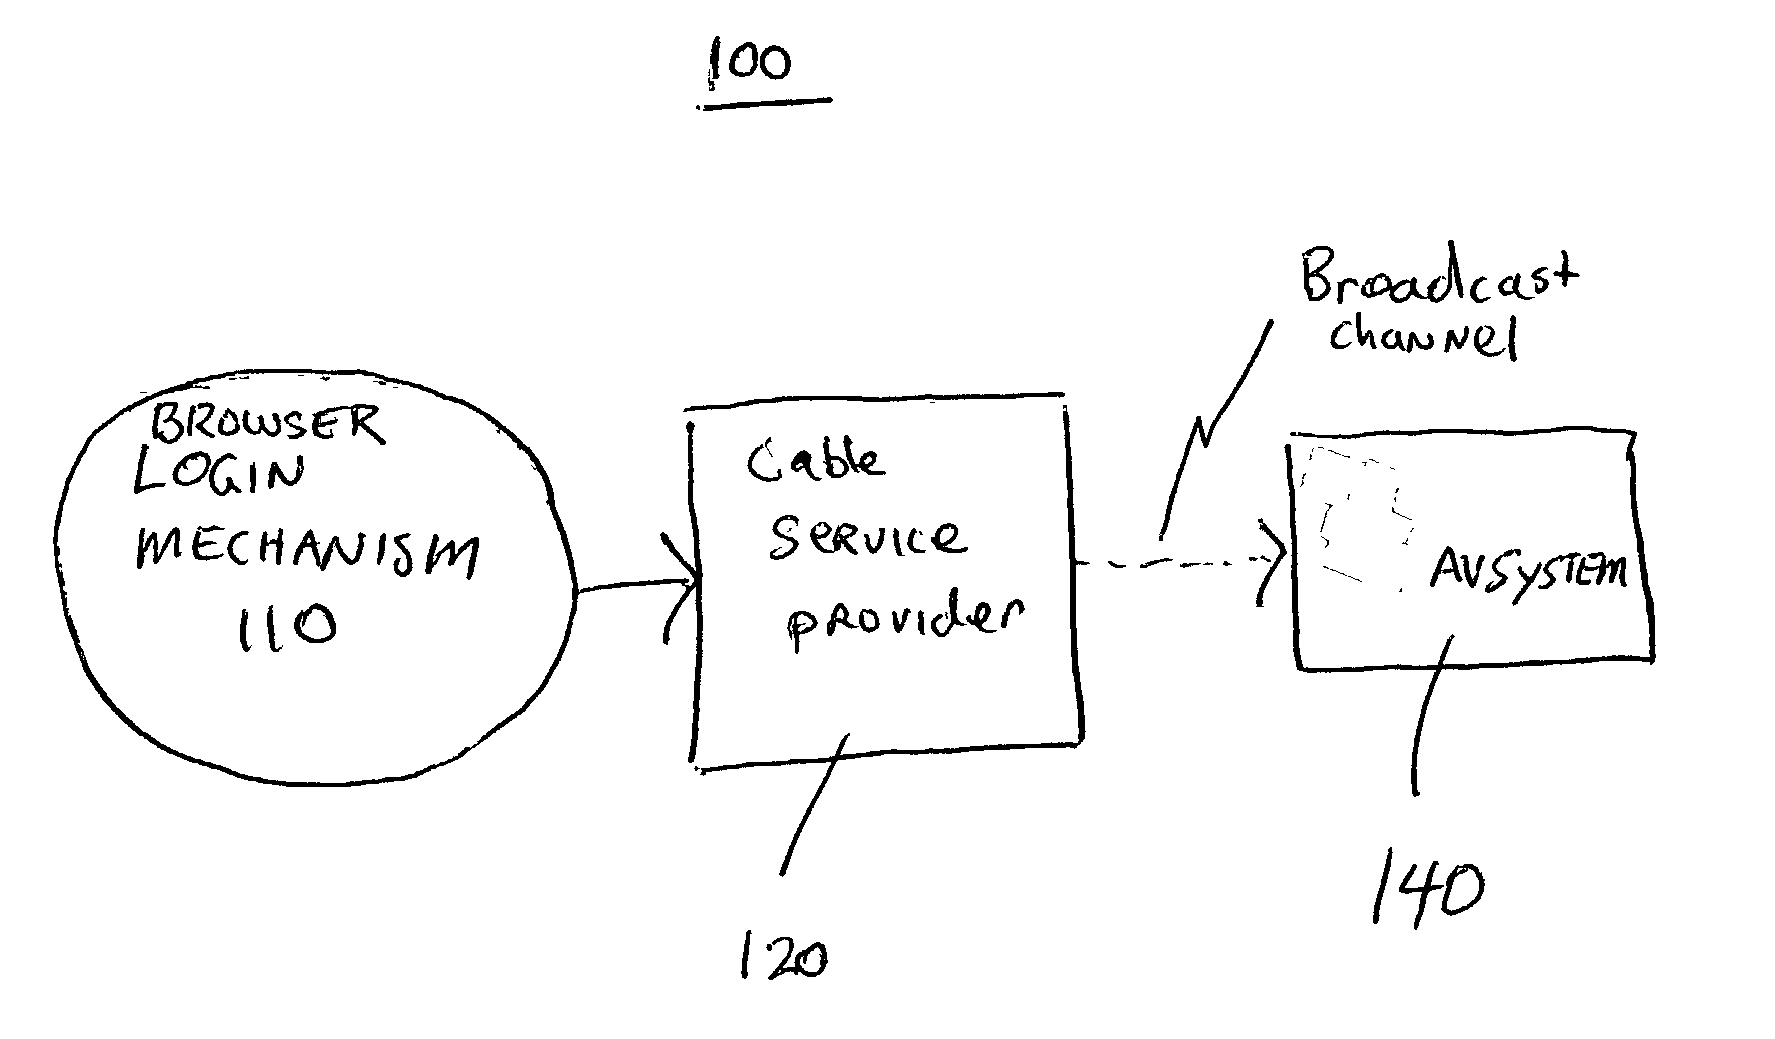 System for remotely selecting broadcasts for recording without a direct connection